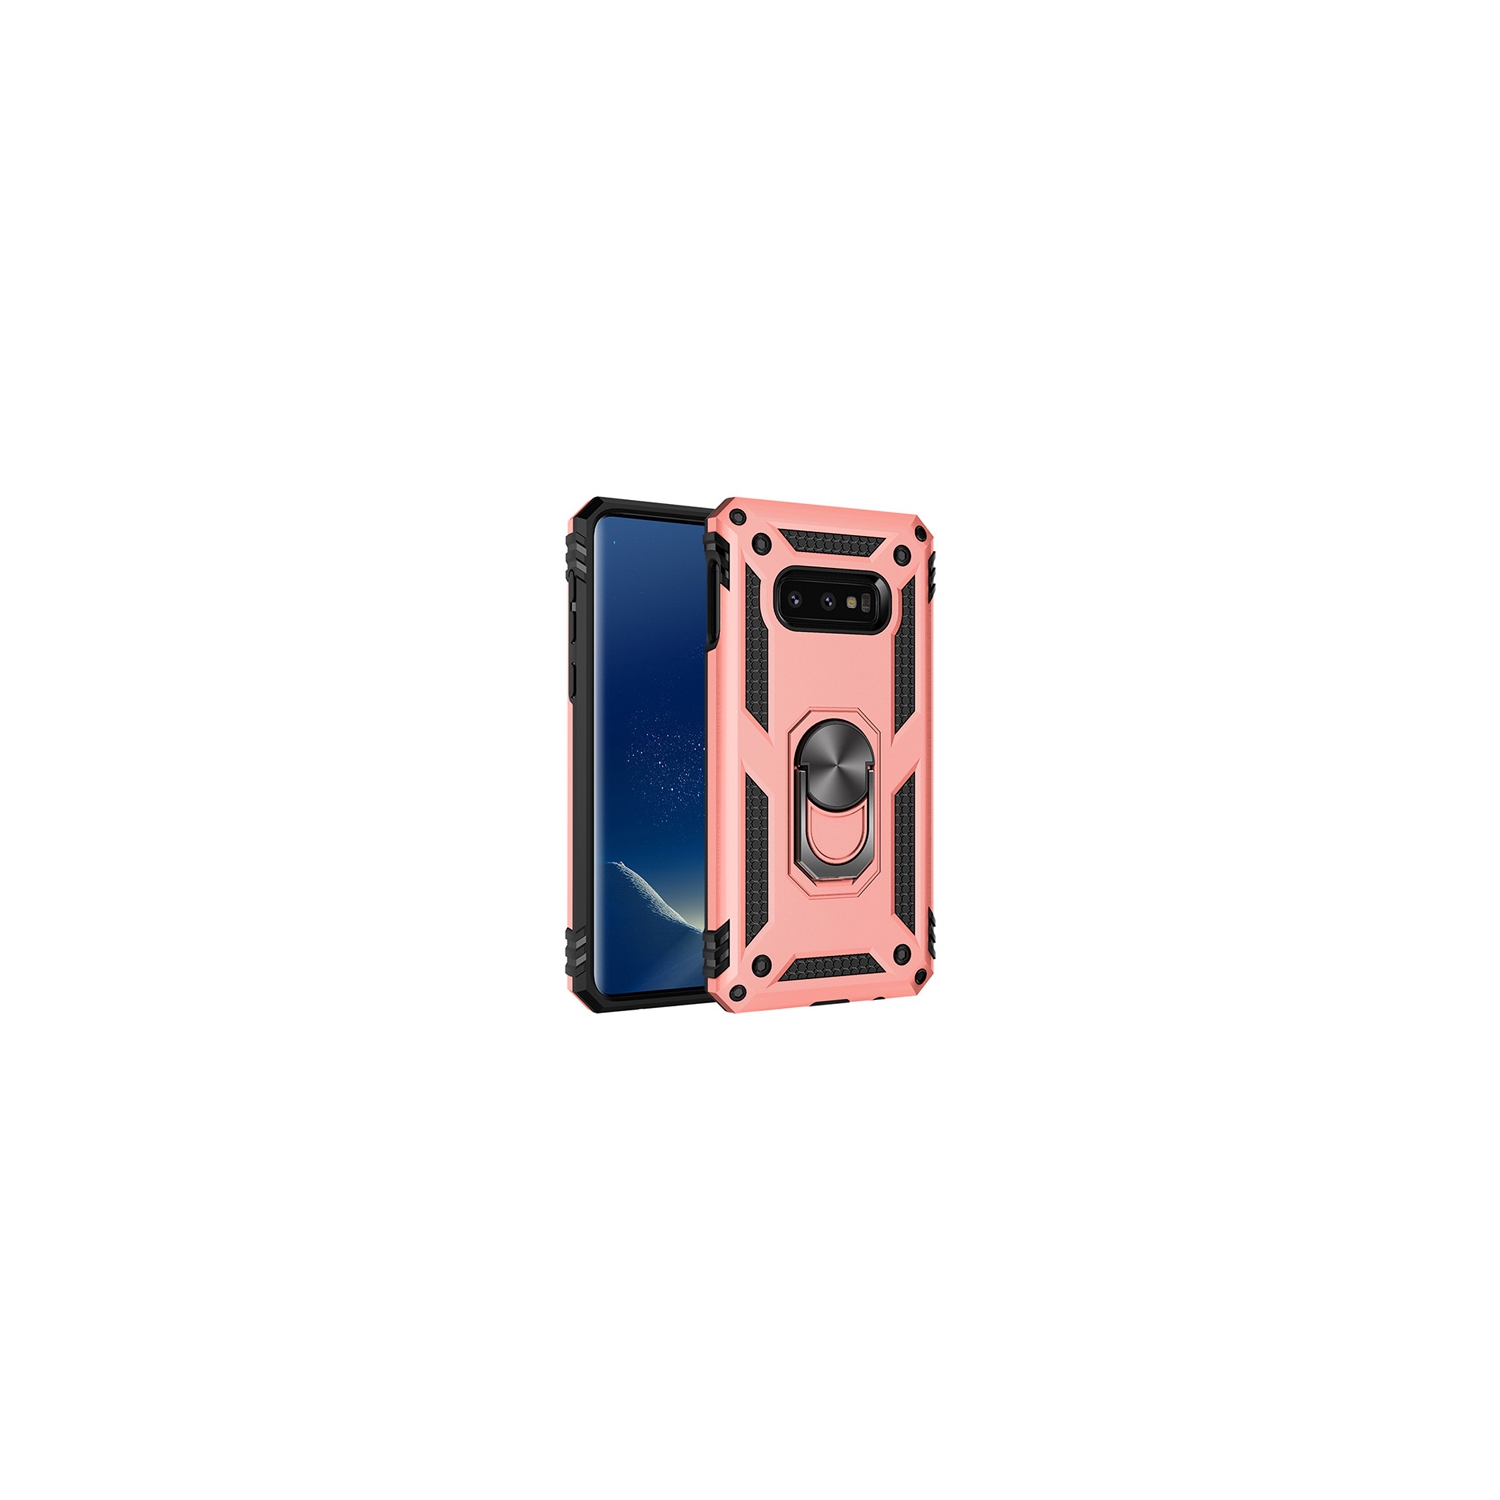 【CSmart】 Anti-Drop Hybrid Magnetic Hard Armor Case with Ring Holder for Samsung Galaxy S8, Rose Gold